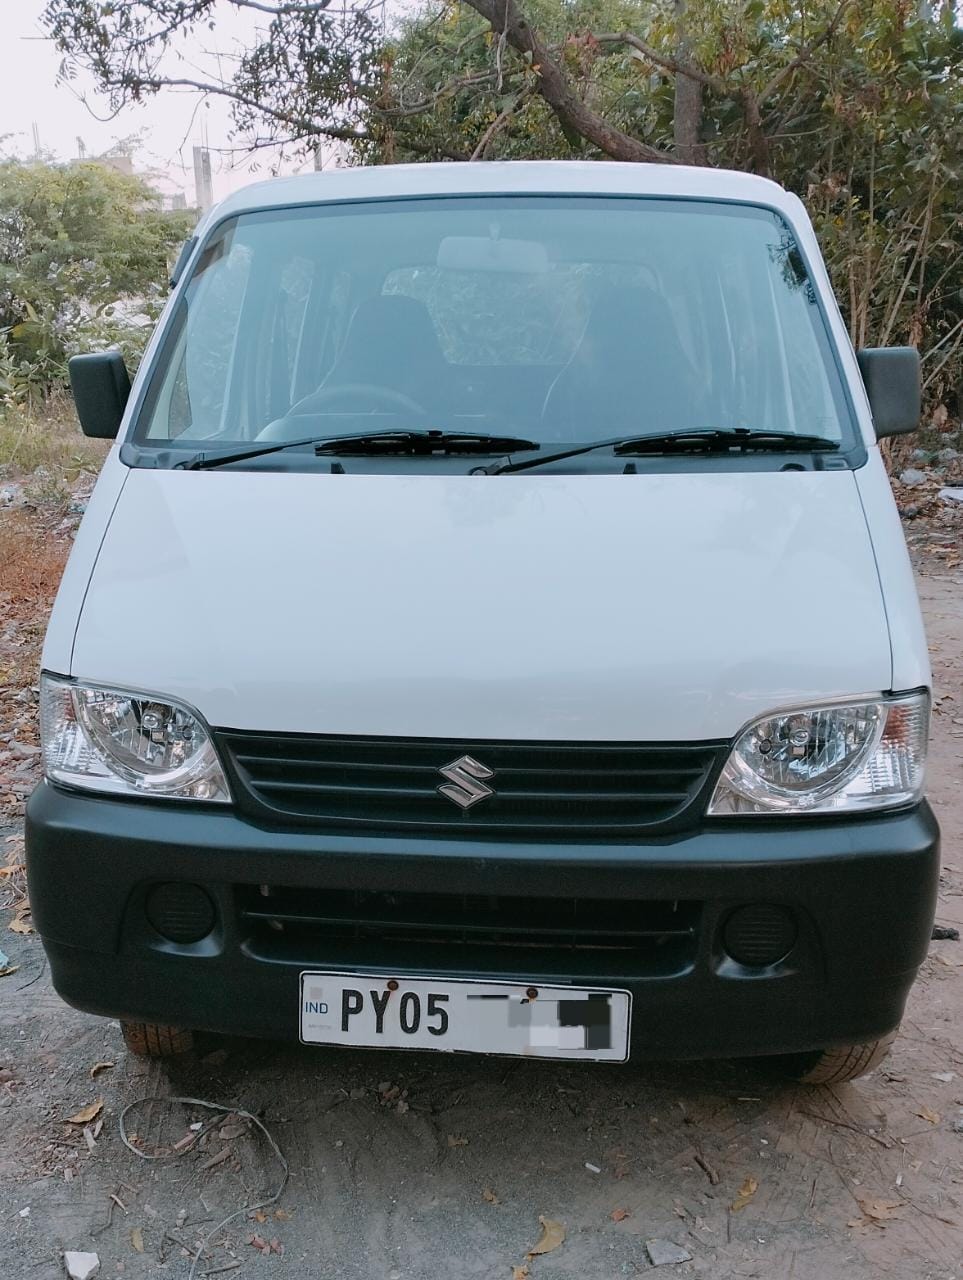 6514-for-sale-Maruthi-Suzuki-Eeco-Petrol-Second-Owner-2018-PY-registered-rs-379000